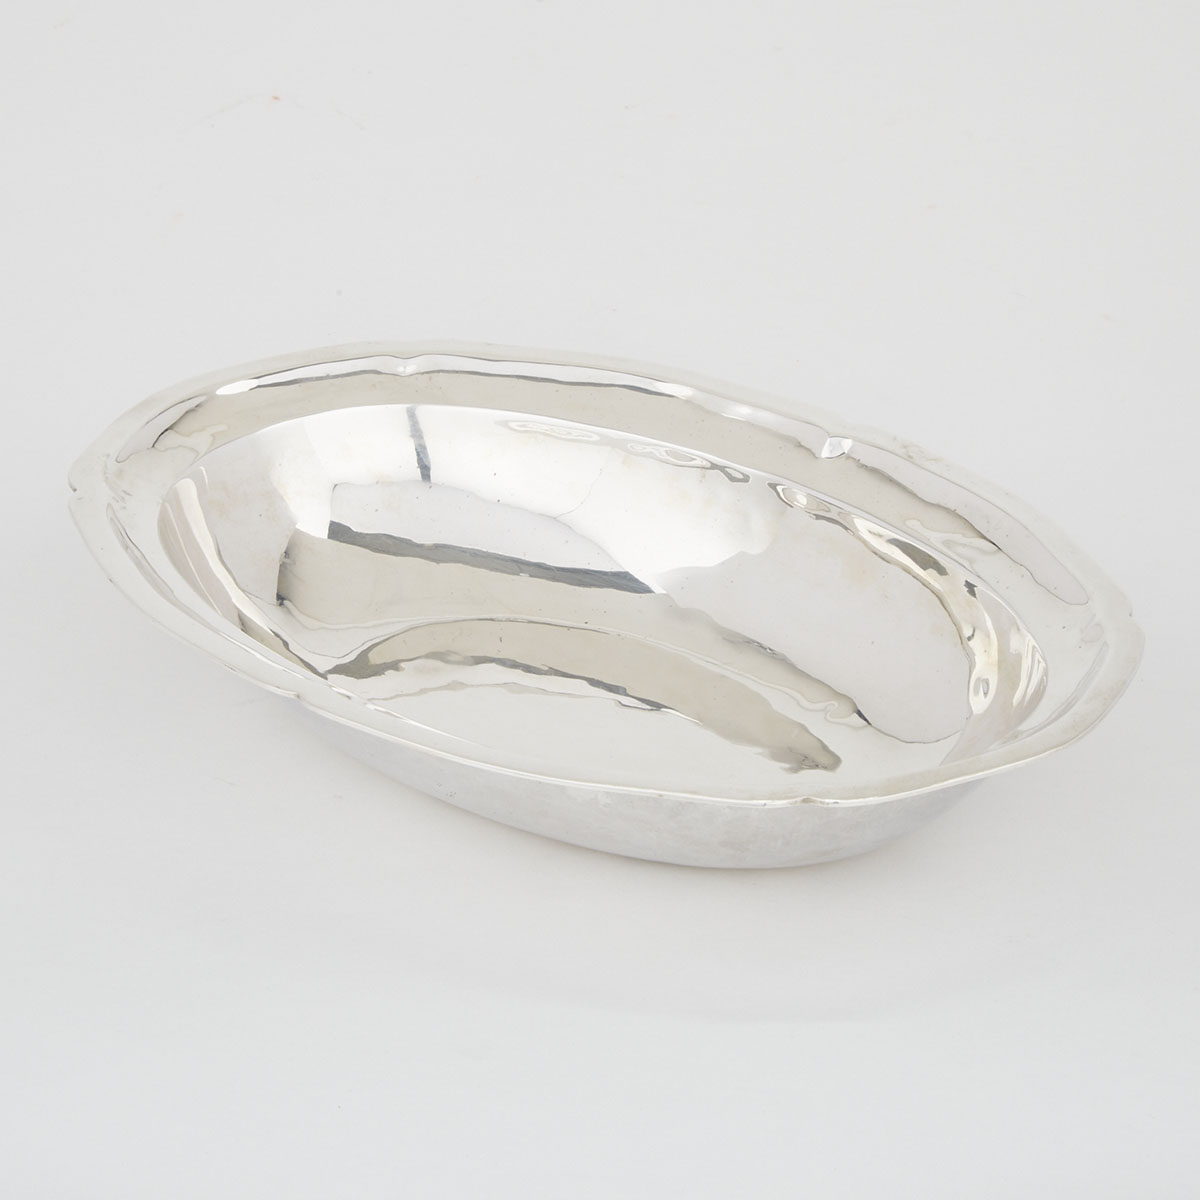 Mexican Silver Oval Serving Dish, Sanborns, Mexico City, 20th century 